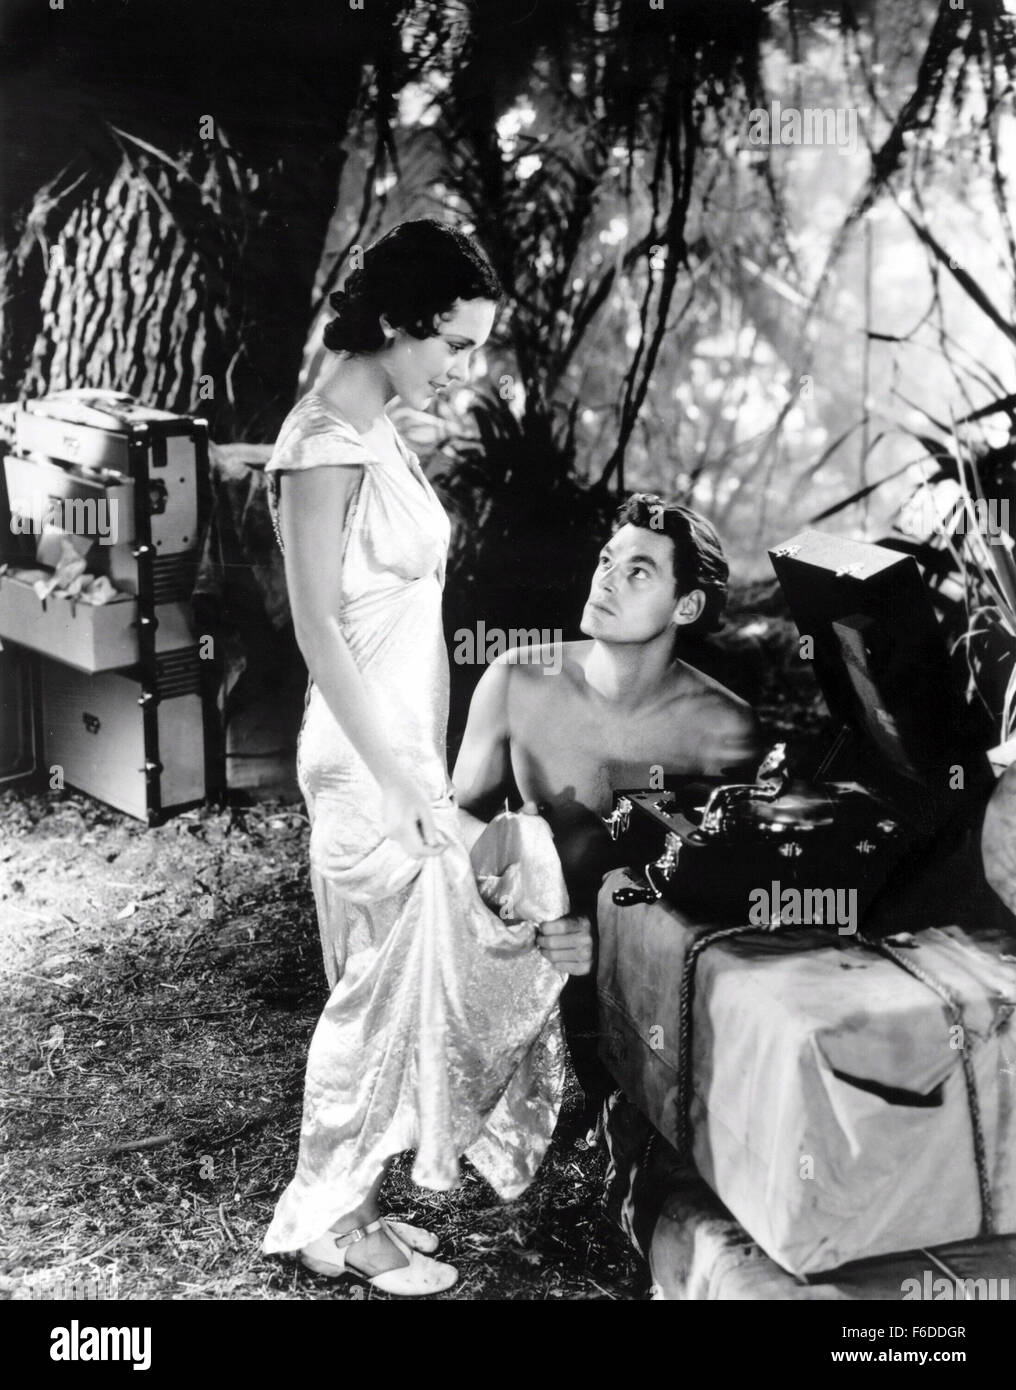 RELEASED: Apr 16, 1934 - Original Film Title: Tarzan and His Mate.  PICTURED: JOHNNY WEISSMULLER, MAUREEN O'SULLIVAN Stock Photo - Alamy